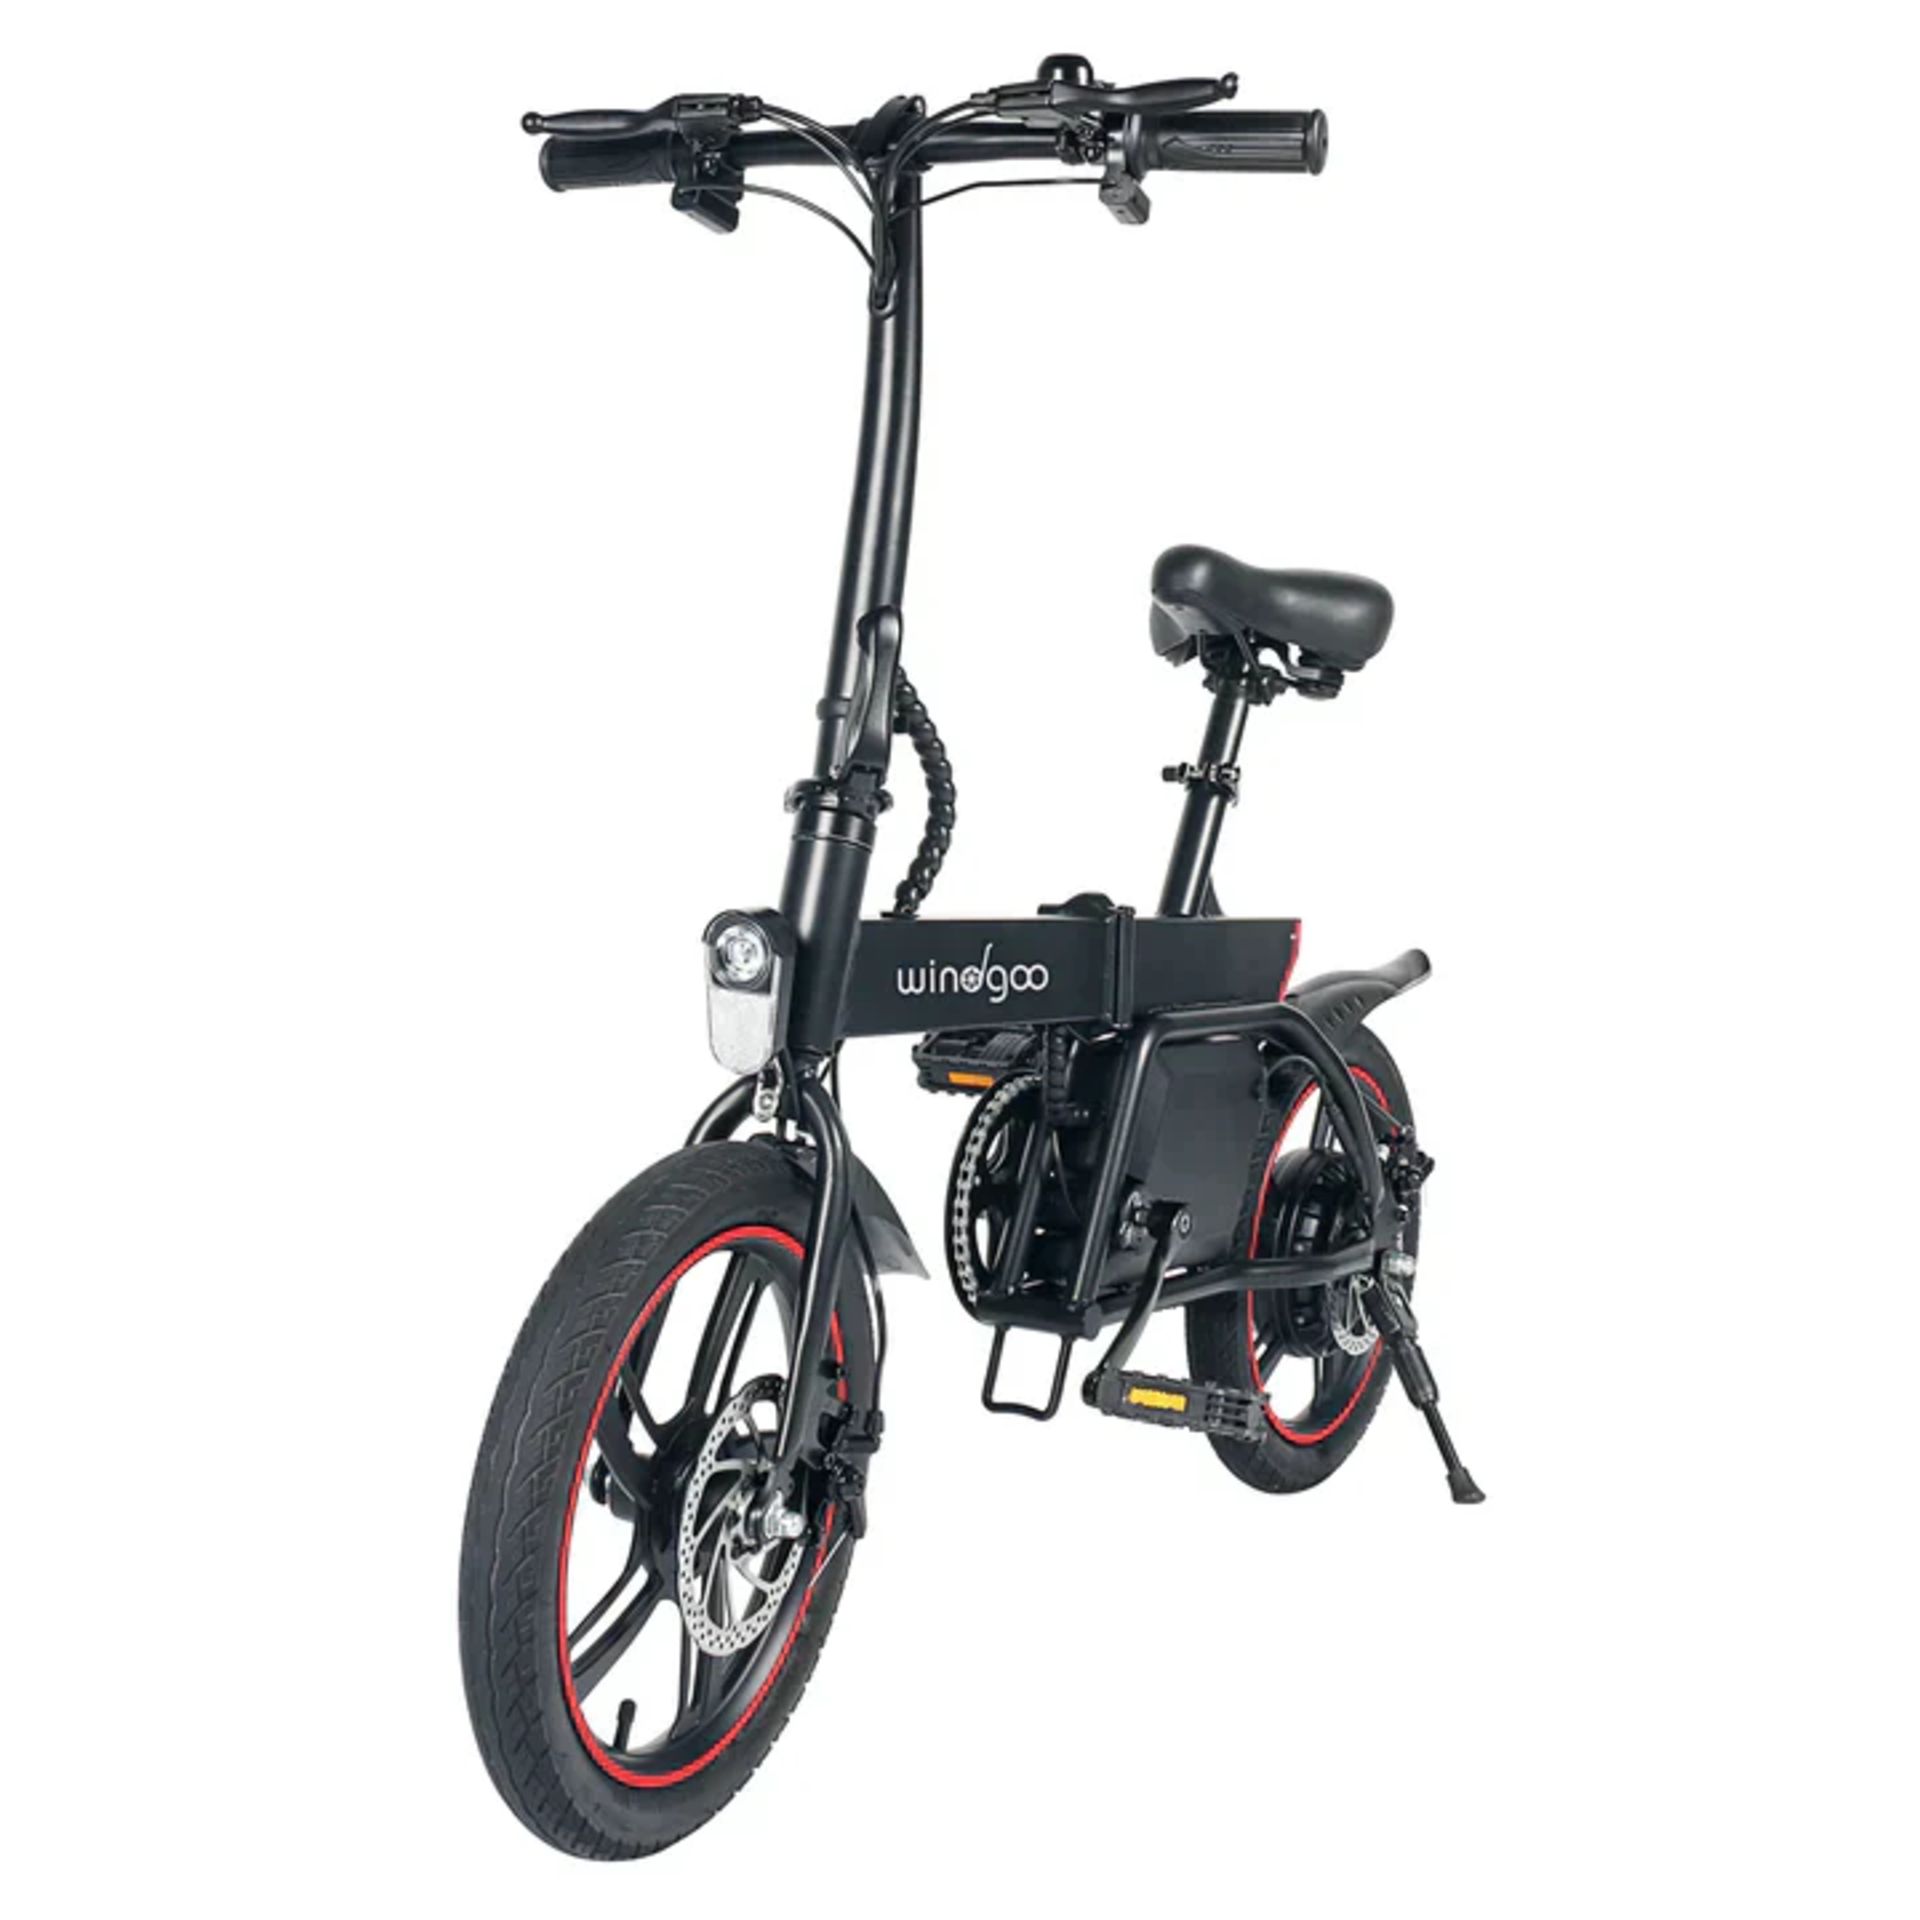 5 X Windgoo B20 Pro Electric Bike. RRP £1,100.99. With 16-inch-wide tires and a frame of upgraded - Bild 3 aus 7